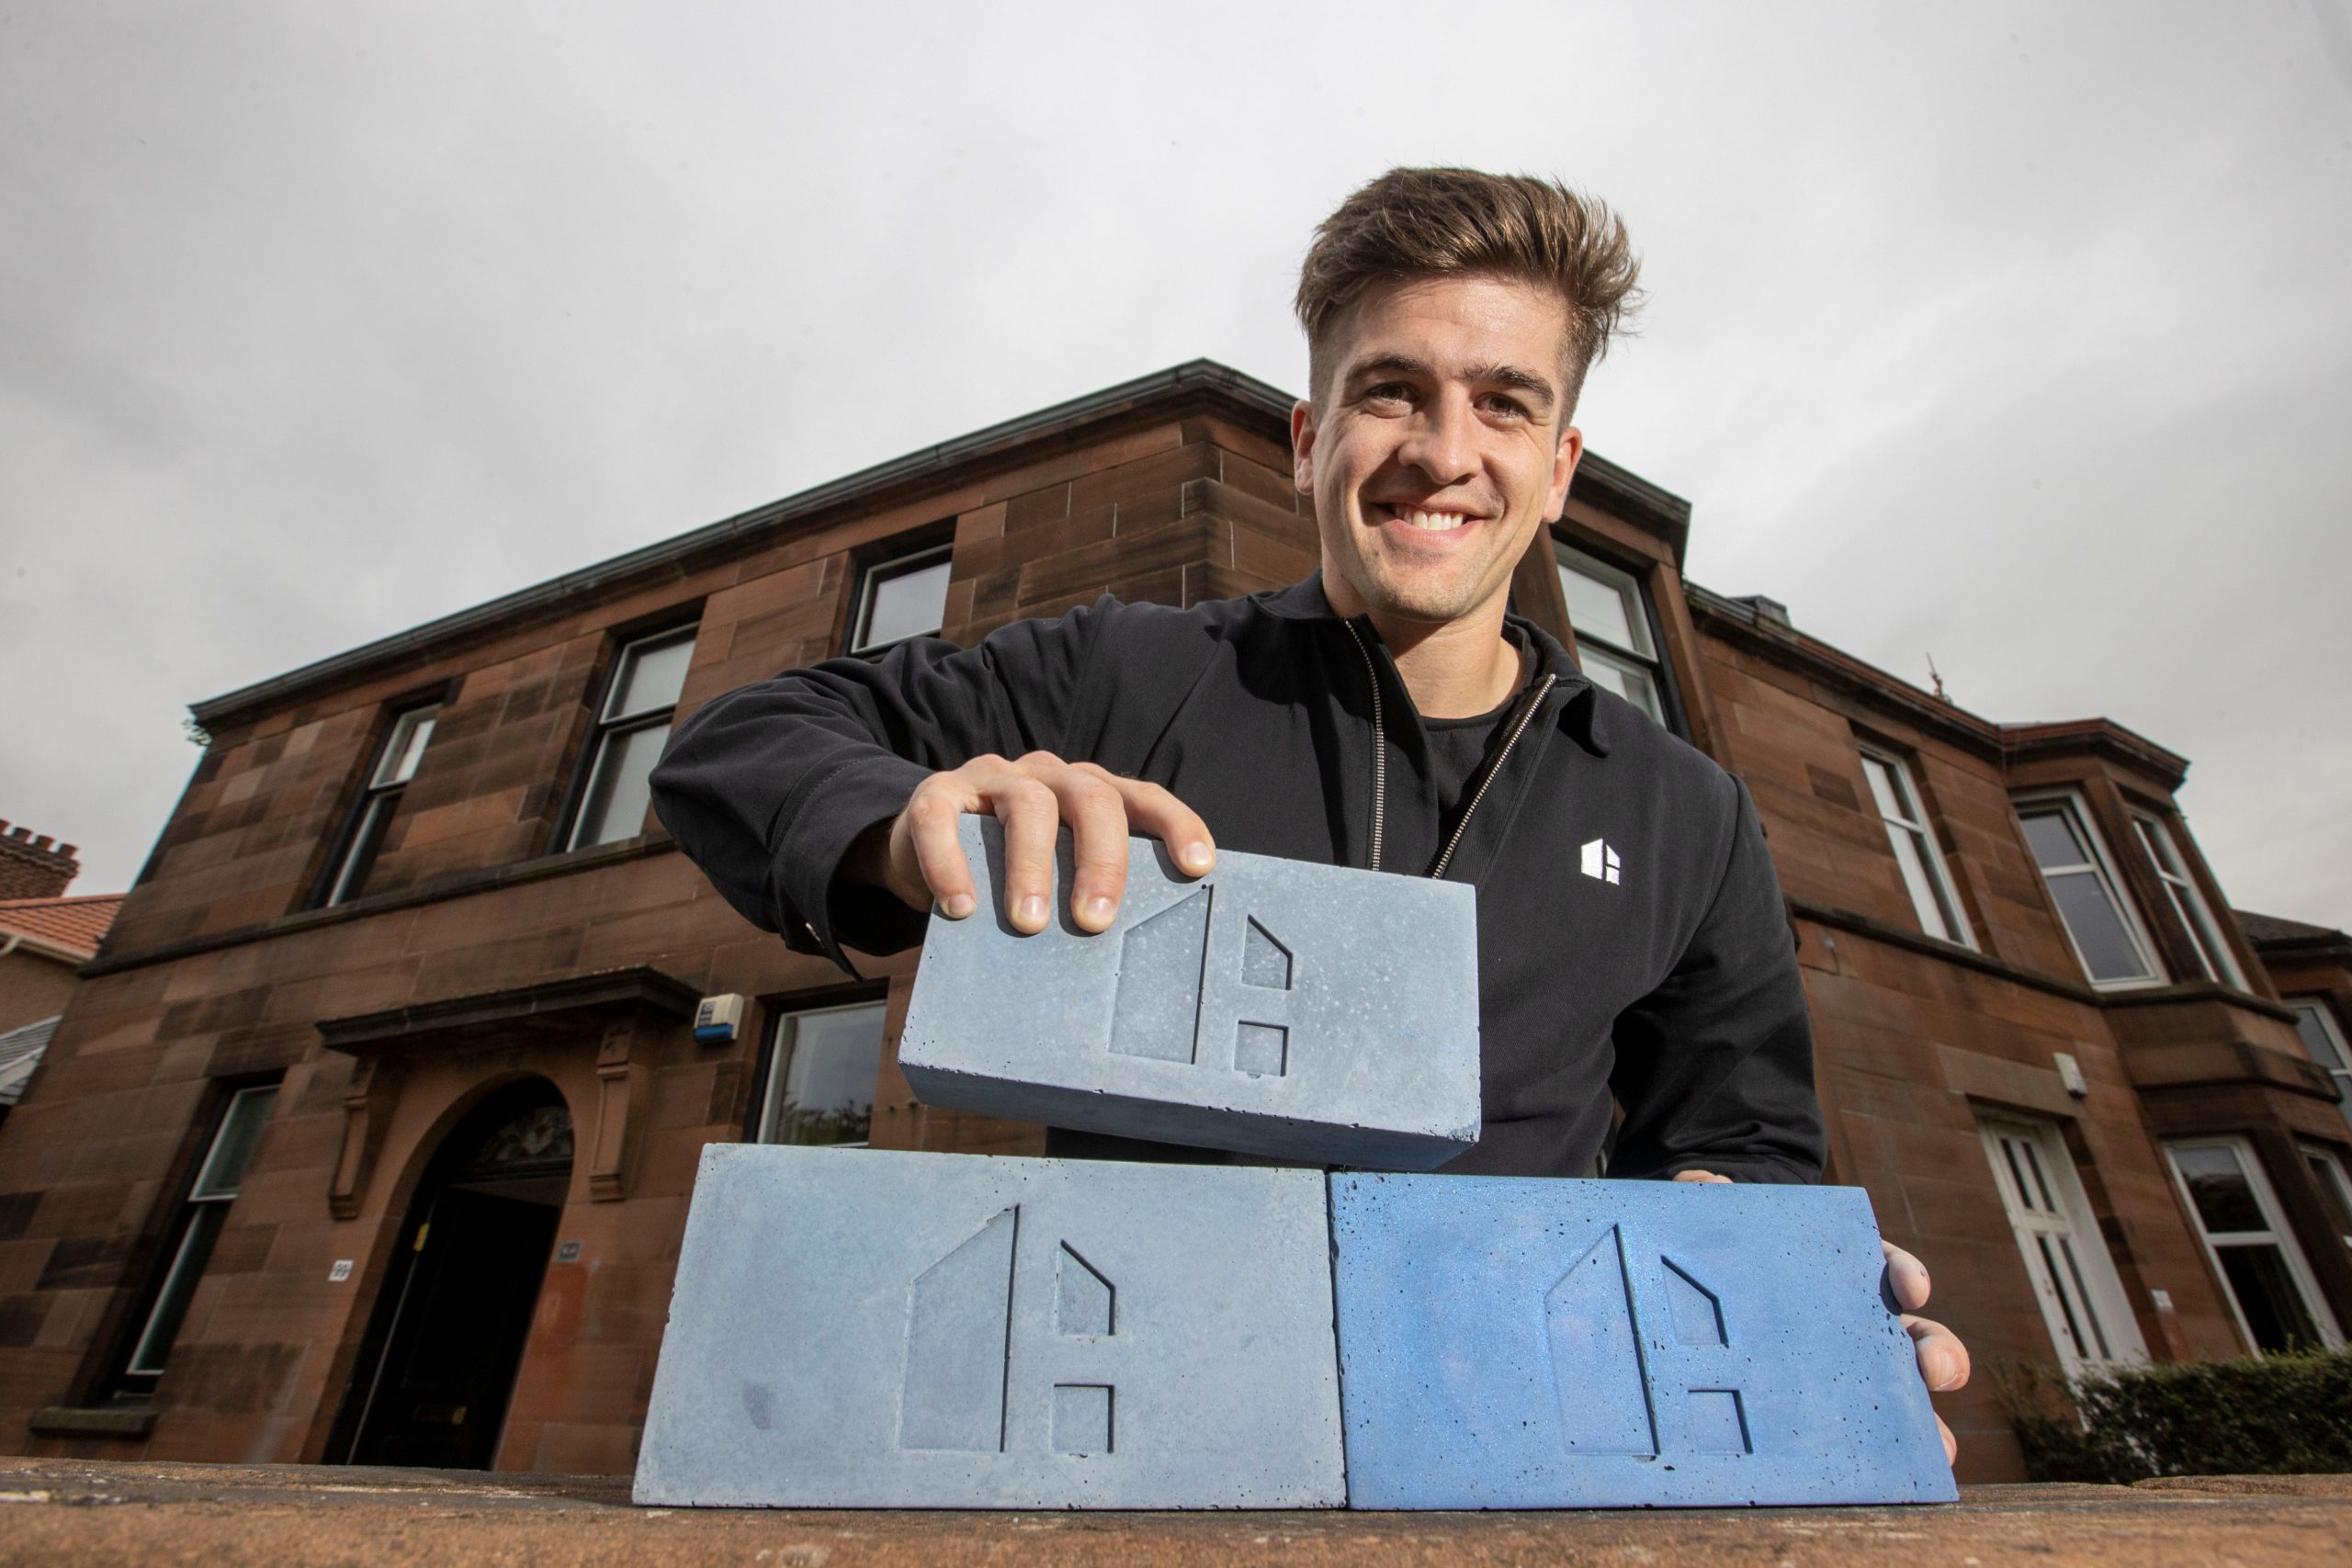 ‘World’s most expensive brick’ up for grabs at £25,000